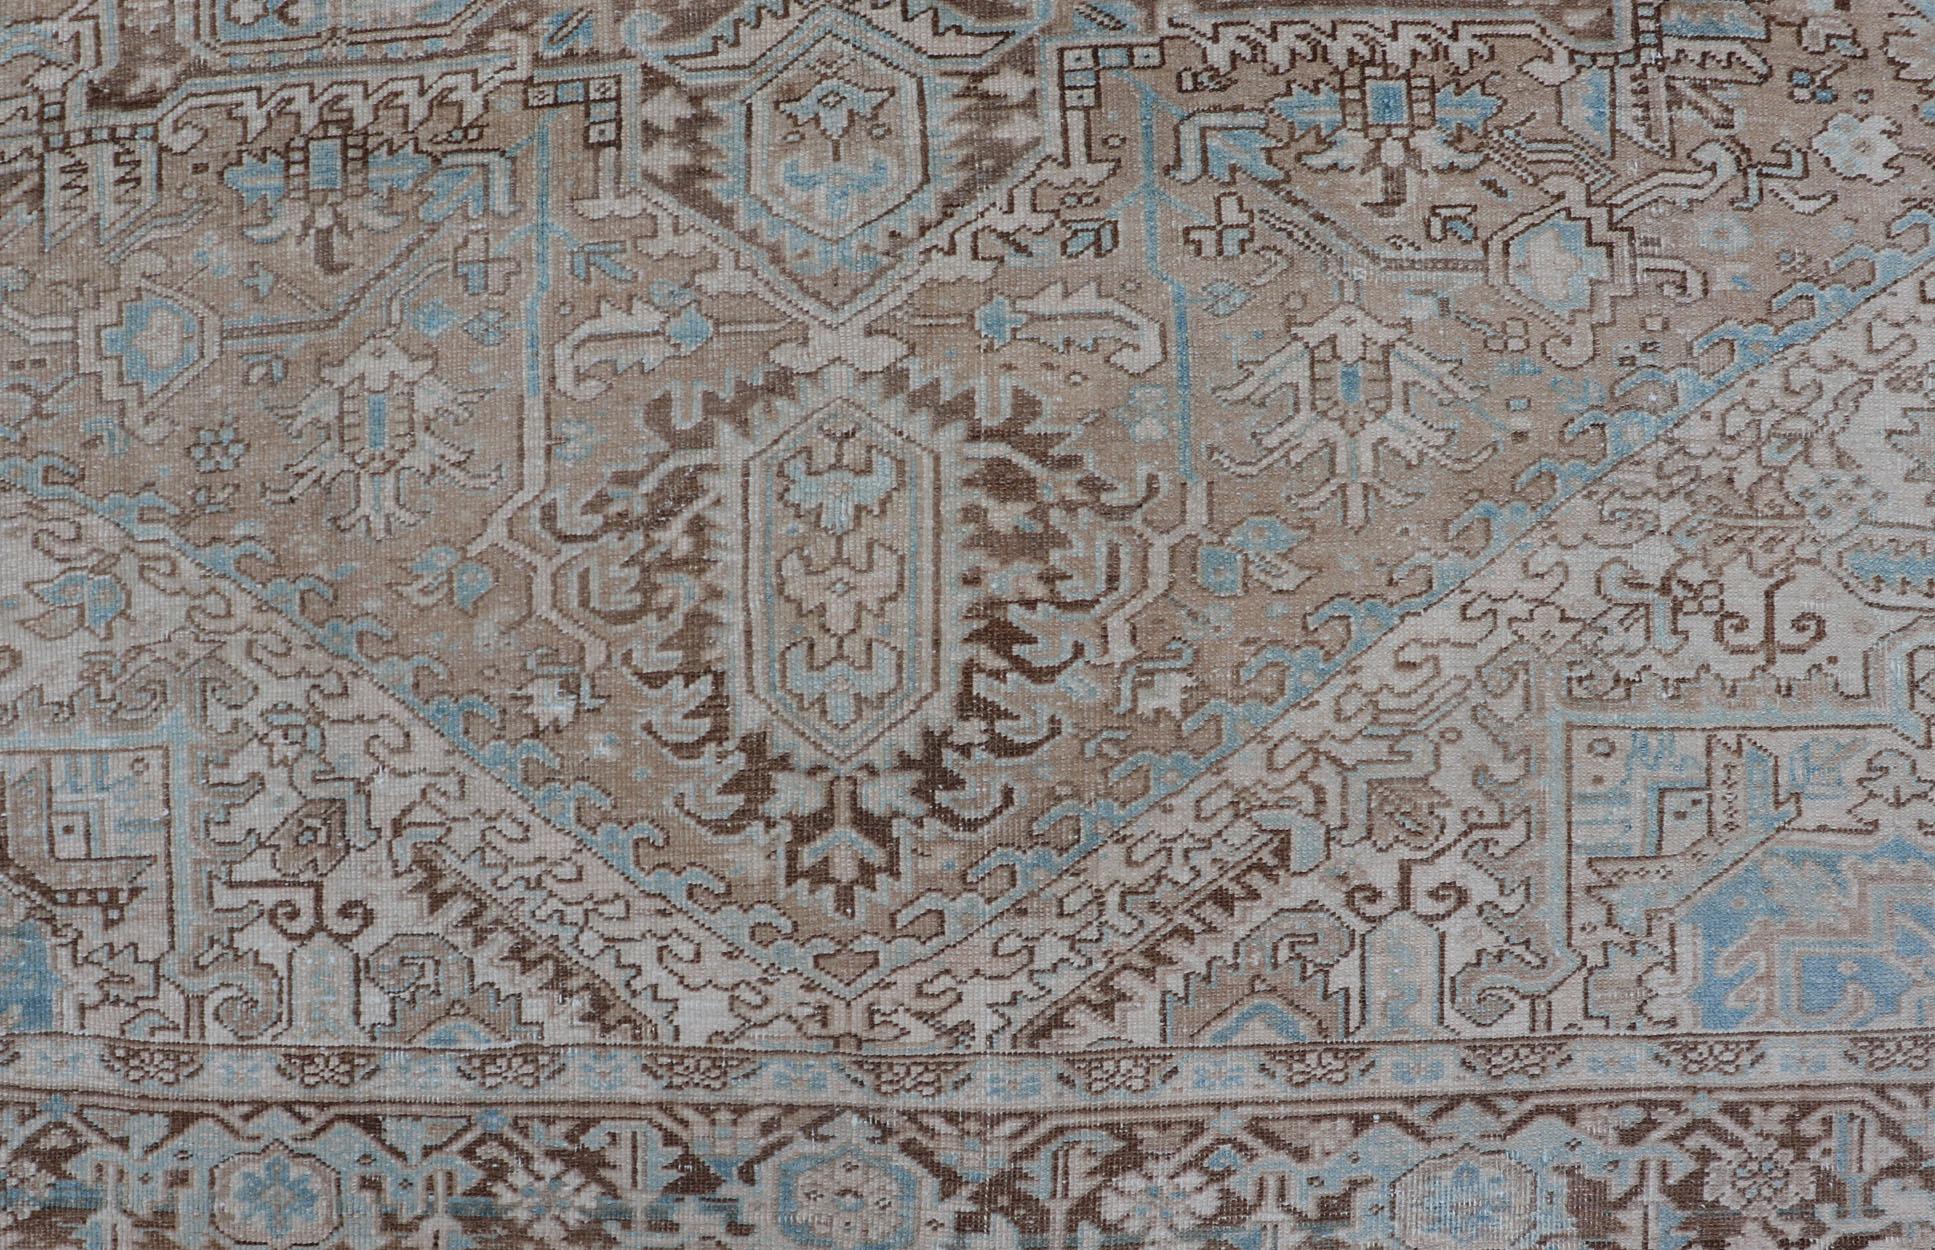 Intricately designed geometric Persian Heriz carpet in earth tones, rug EMB-9539-P13038, country of origin / type: Iran / Heriz, circa 1930

This magnificent vintage Persian Heriz carpet from the mid-20th century (circa 1930) bears an exquisite